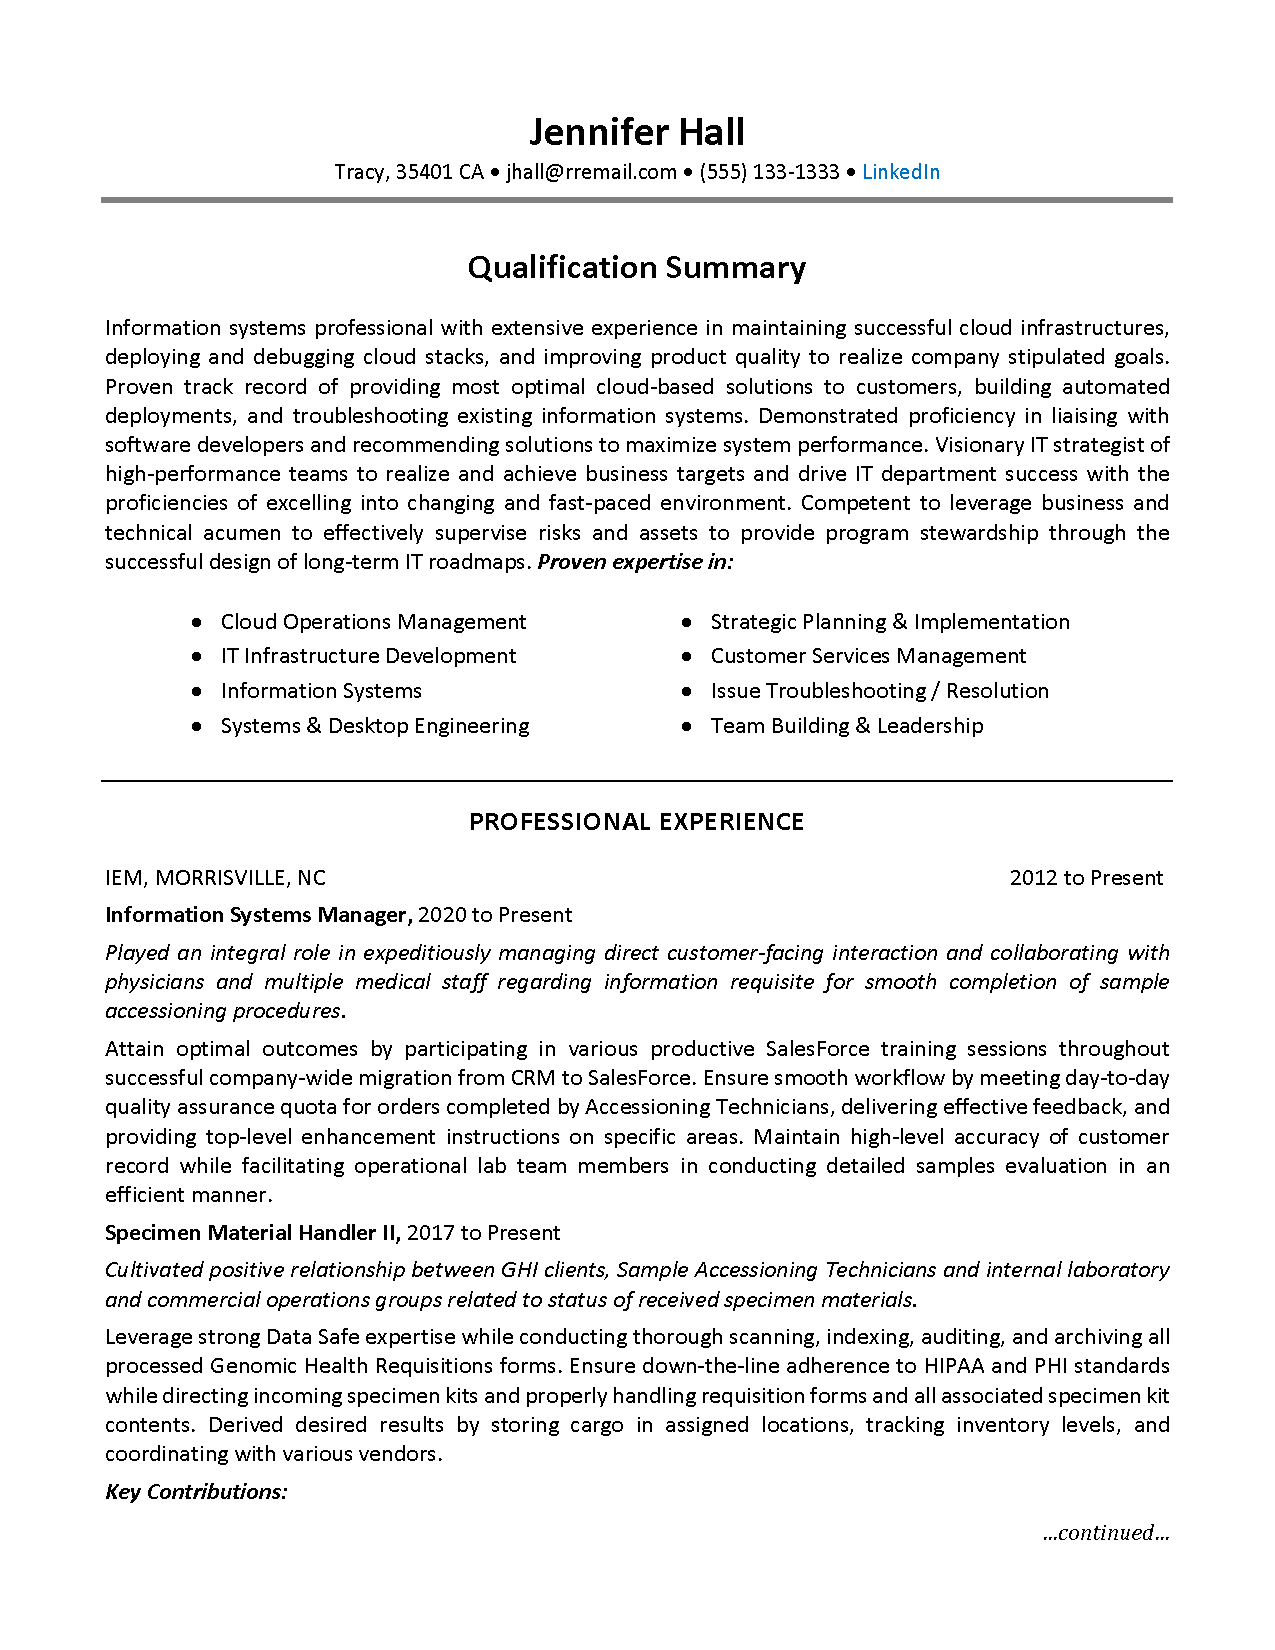 Information systems resume example Page 1